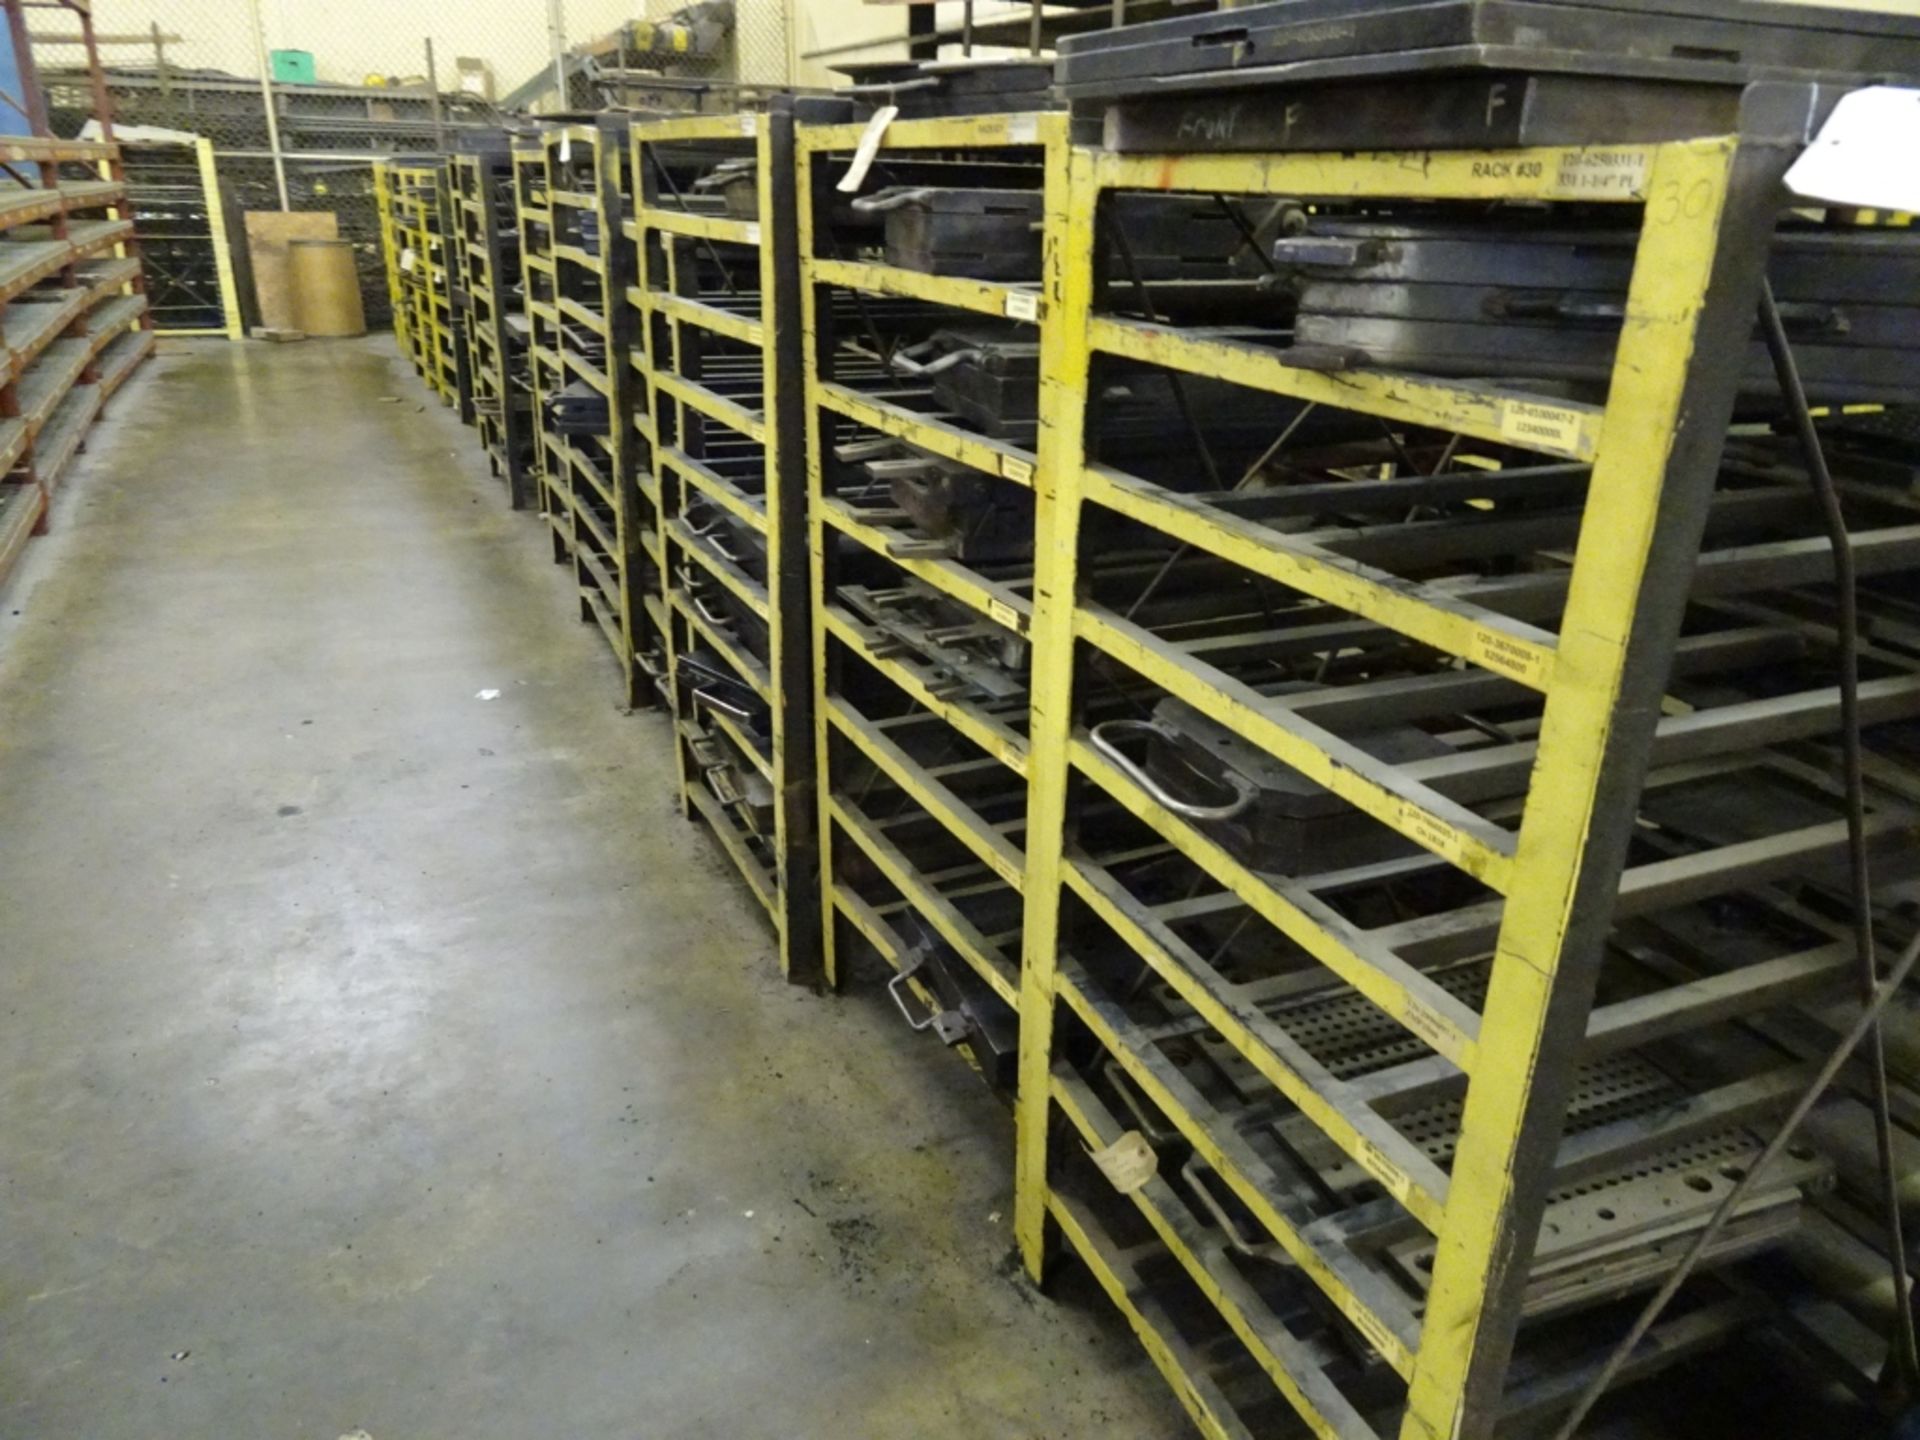 (13) Various Sized Heavy Duty Steel Mold Racks With No Contents